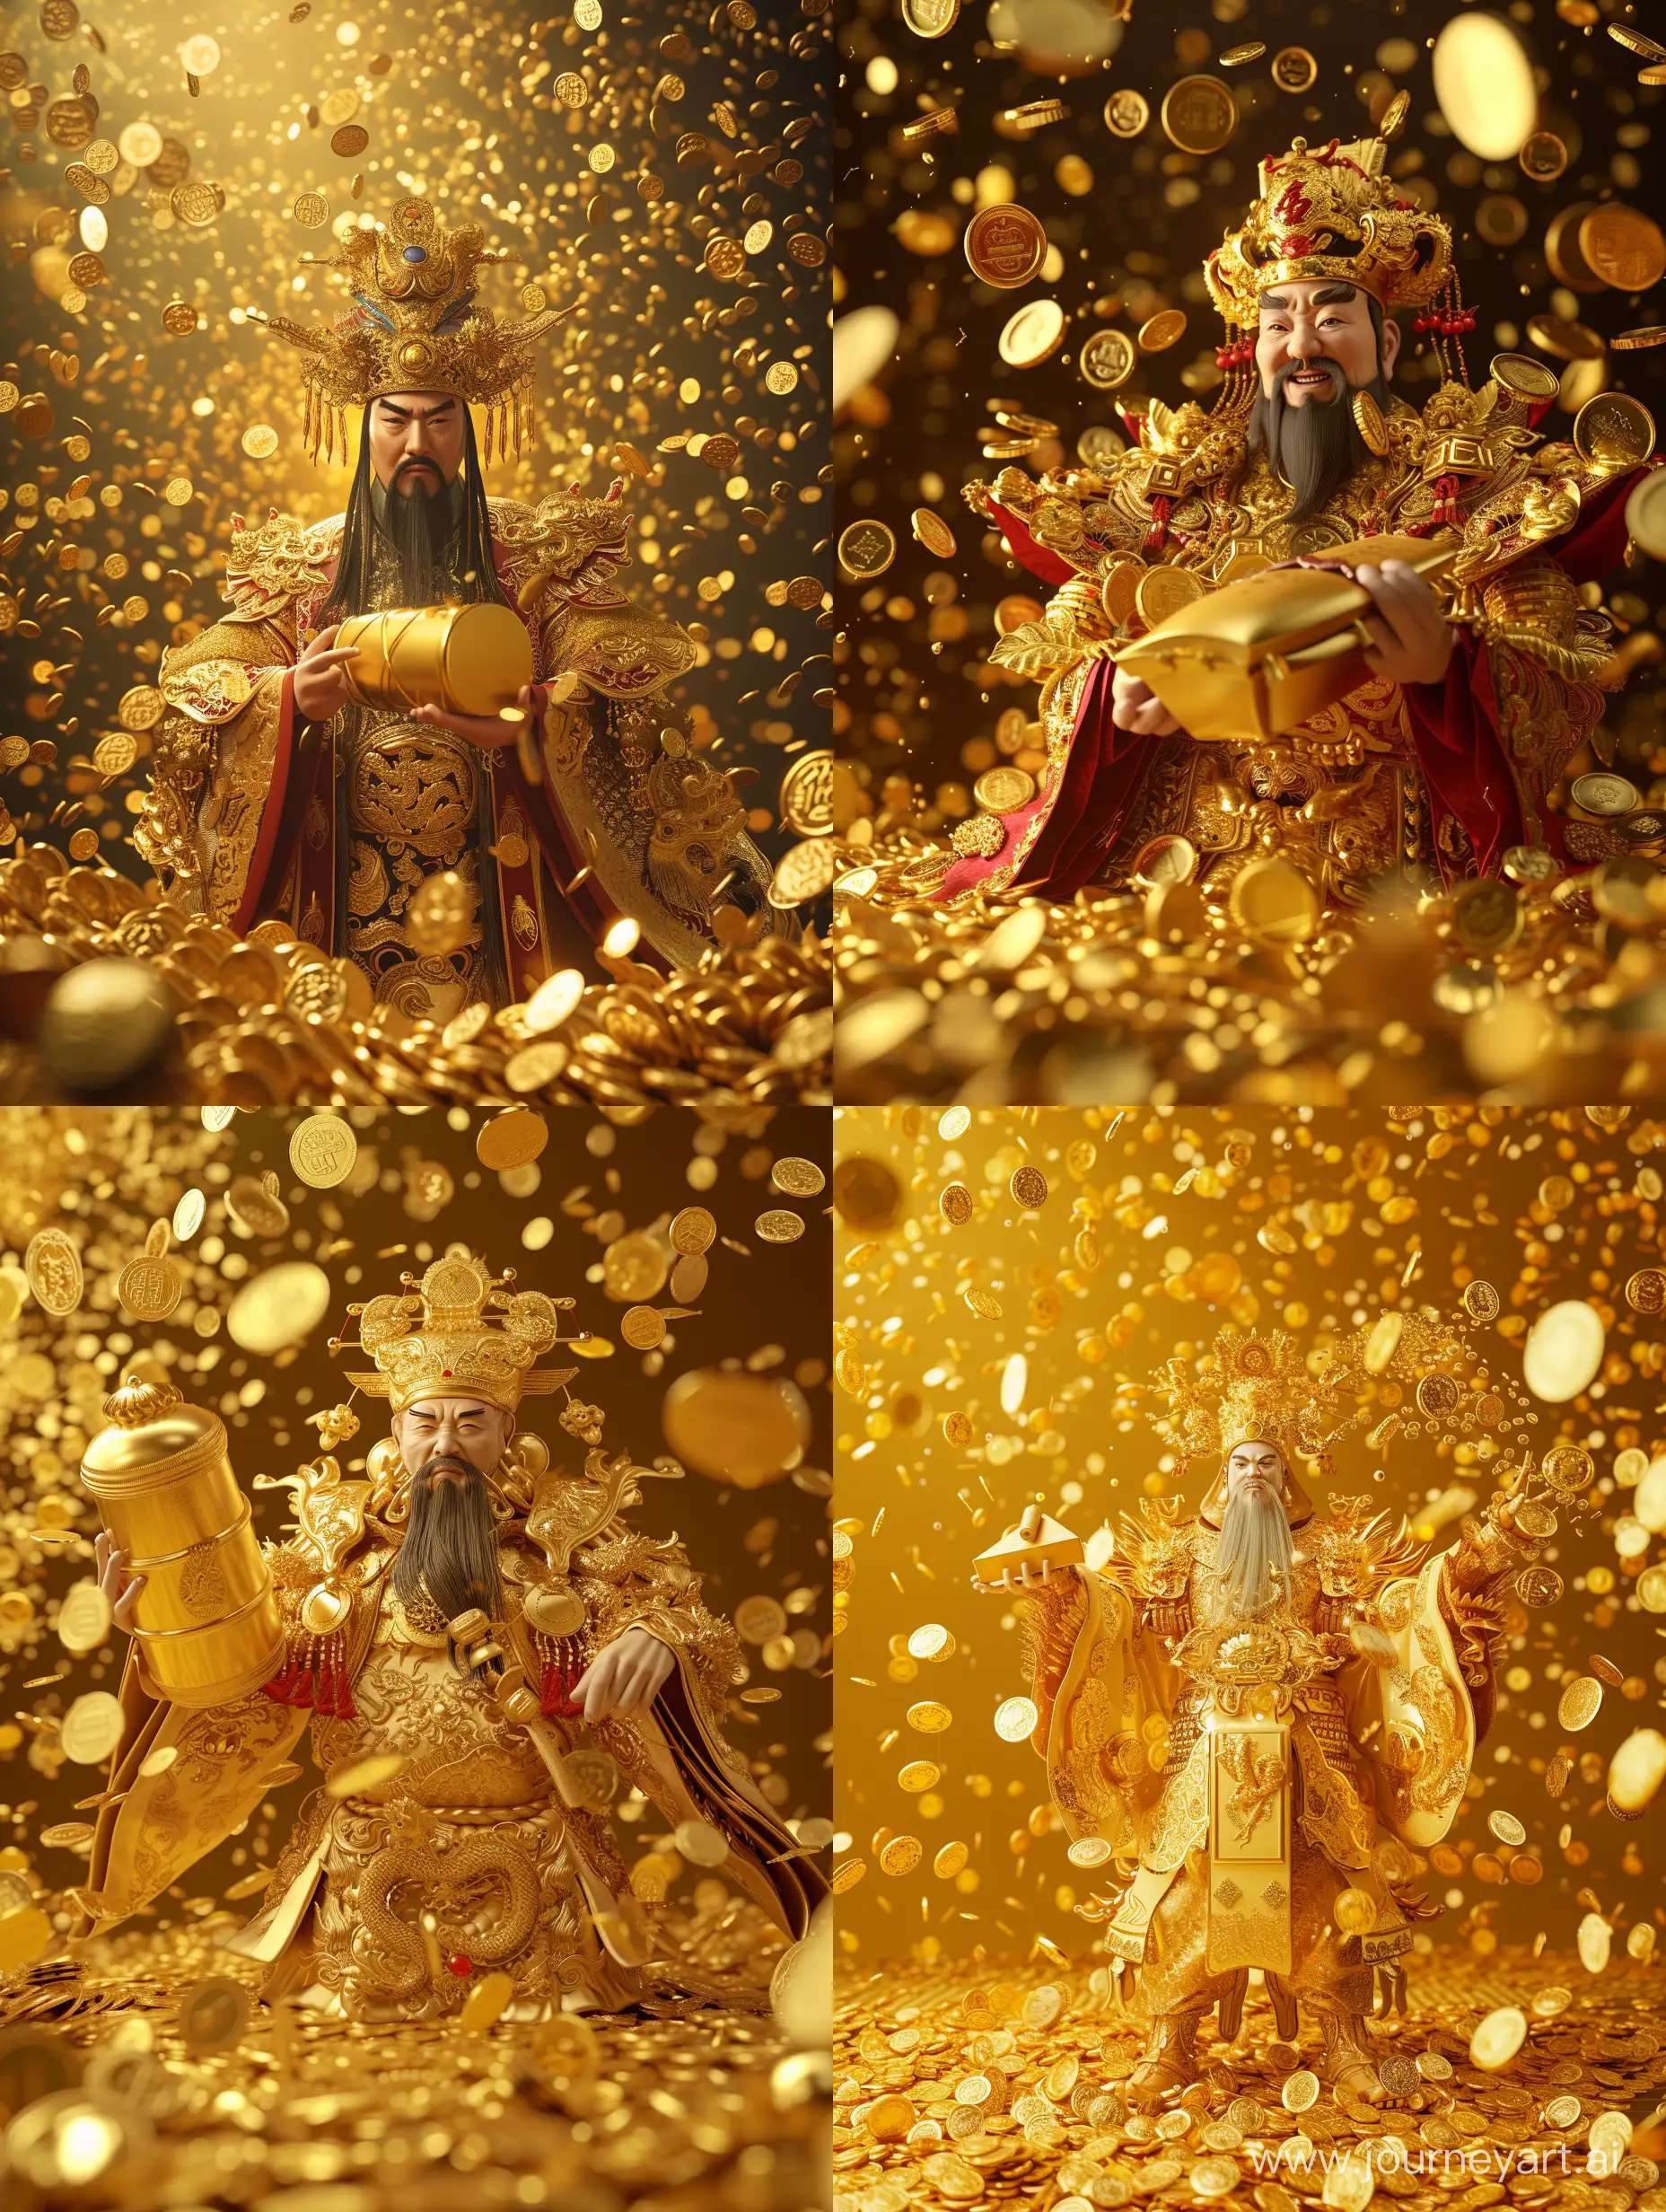 3D image of Chinese God of Wealth, holding a gold ingot, surrounded by scattered gold coins with a background of falling gold coins, wearing gold attire and ornaments, with top-tier detail and lighting effects, in a panoramic view by nelson wu, predominantly in gold, capturing the highest level of detail through a wide-angle lens